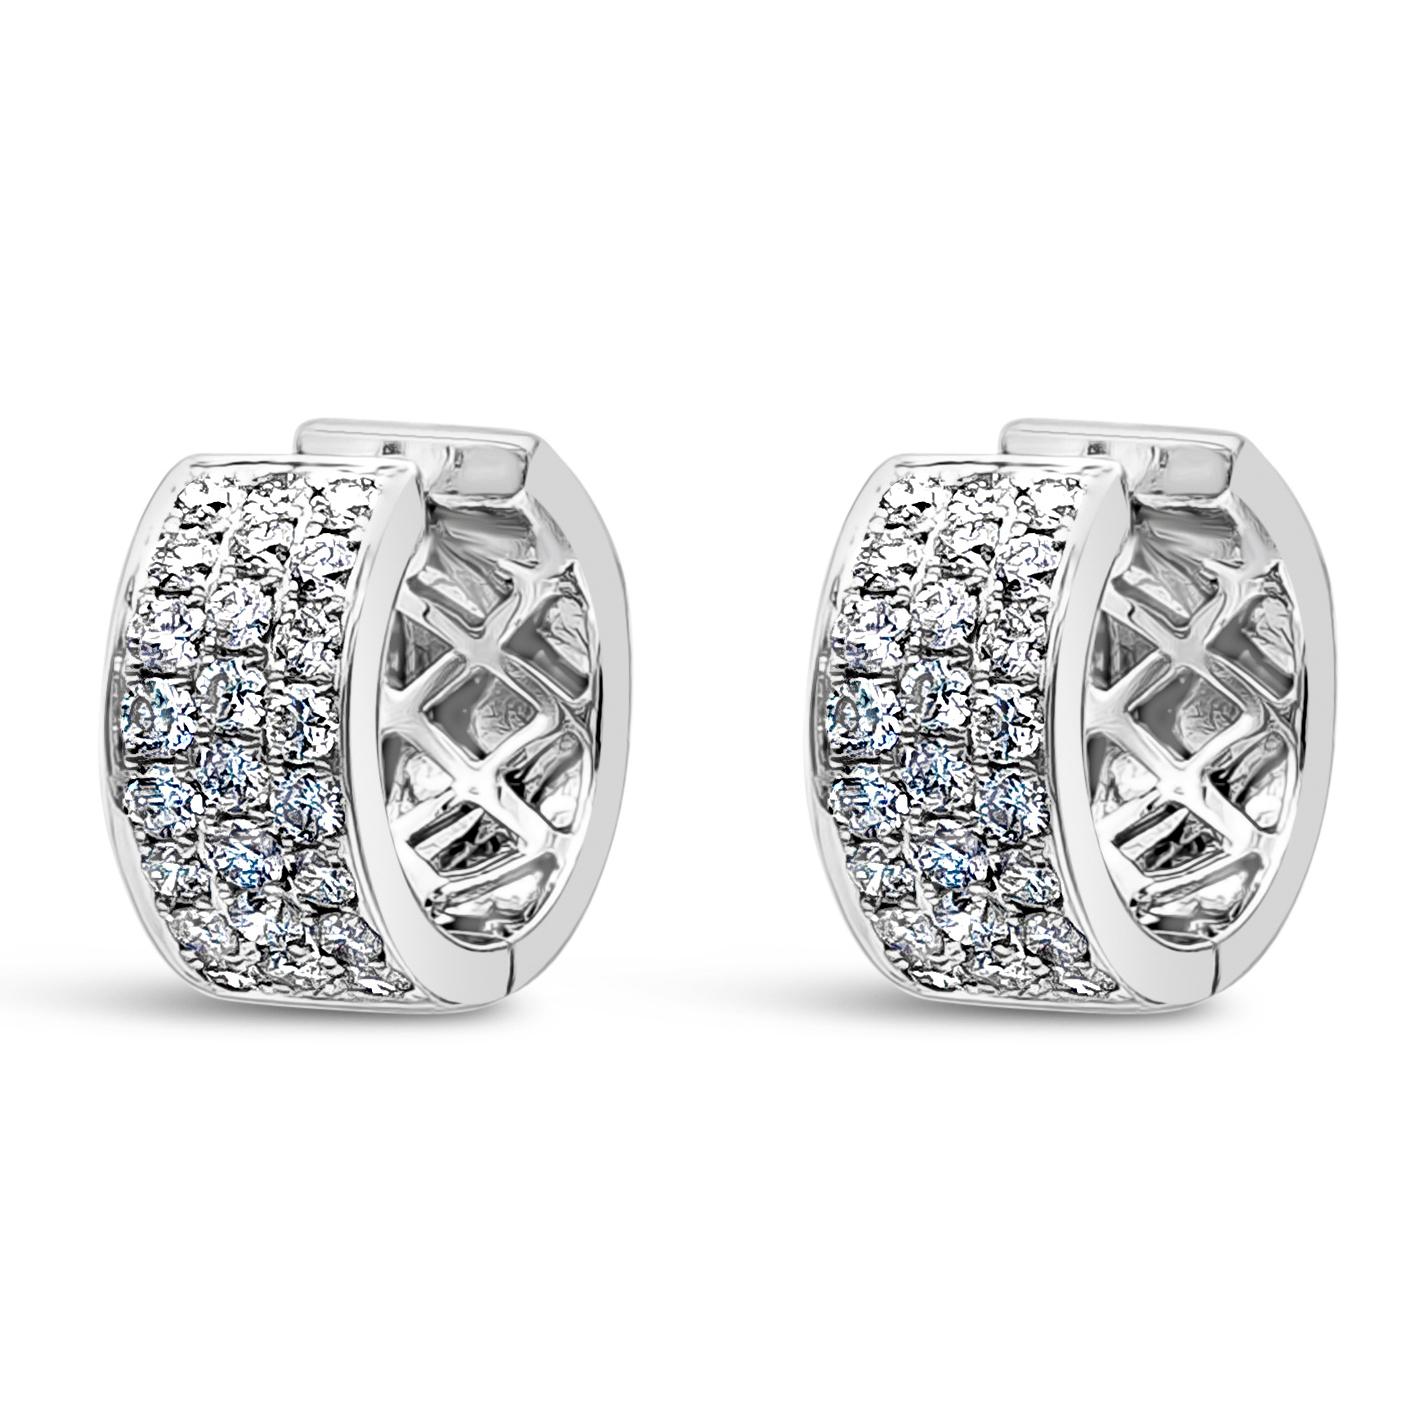 A simple chic huggie hoop earrings, showcasing 48 round cut diamonds weighing 1.04 carats total with F color and VS clarity in a pavé style setting. Made with 18K white gold. 

Roman Malakov is a custom house, specializing in creating anything you